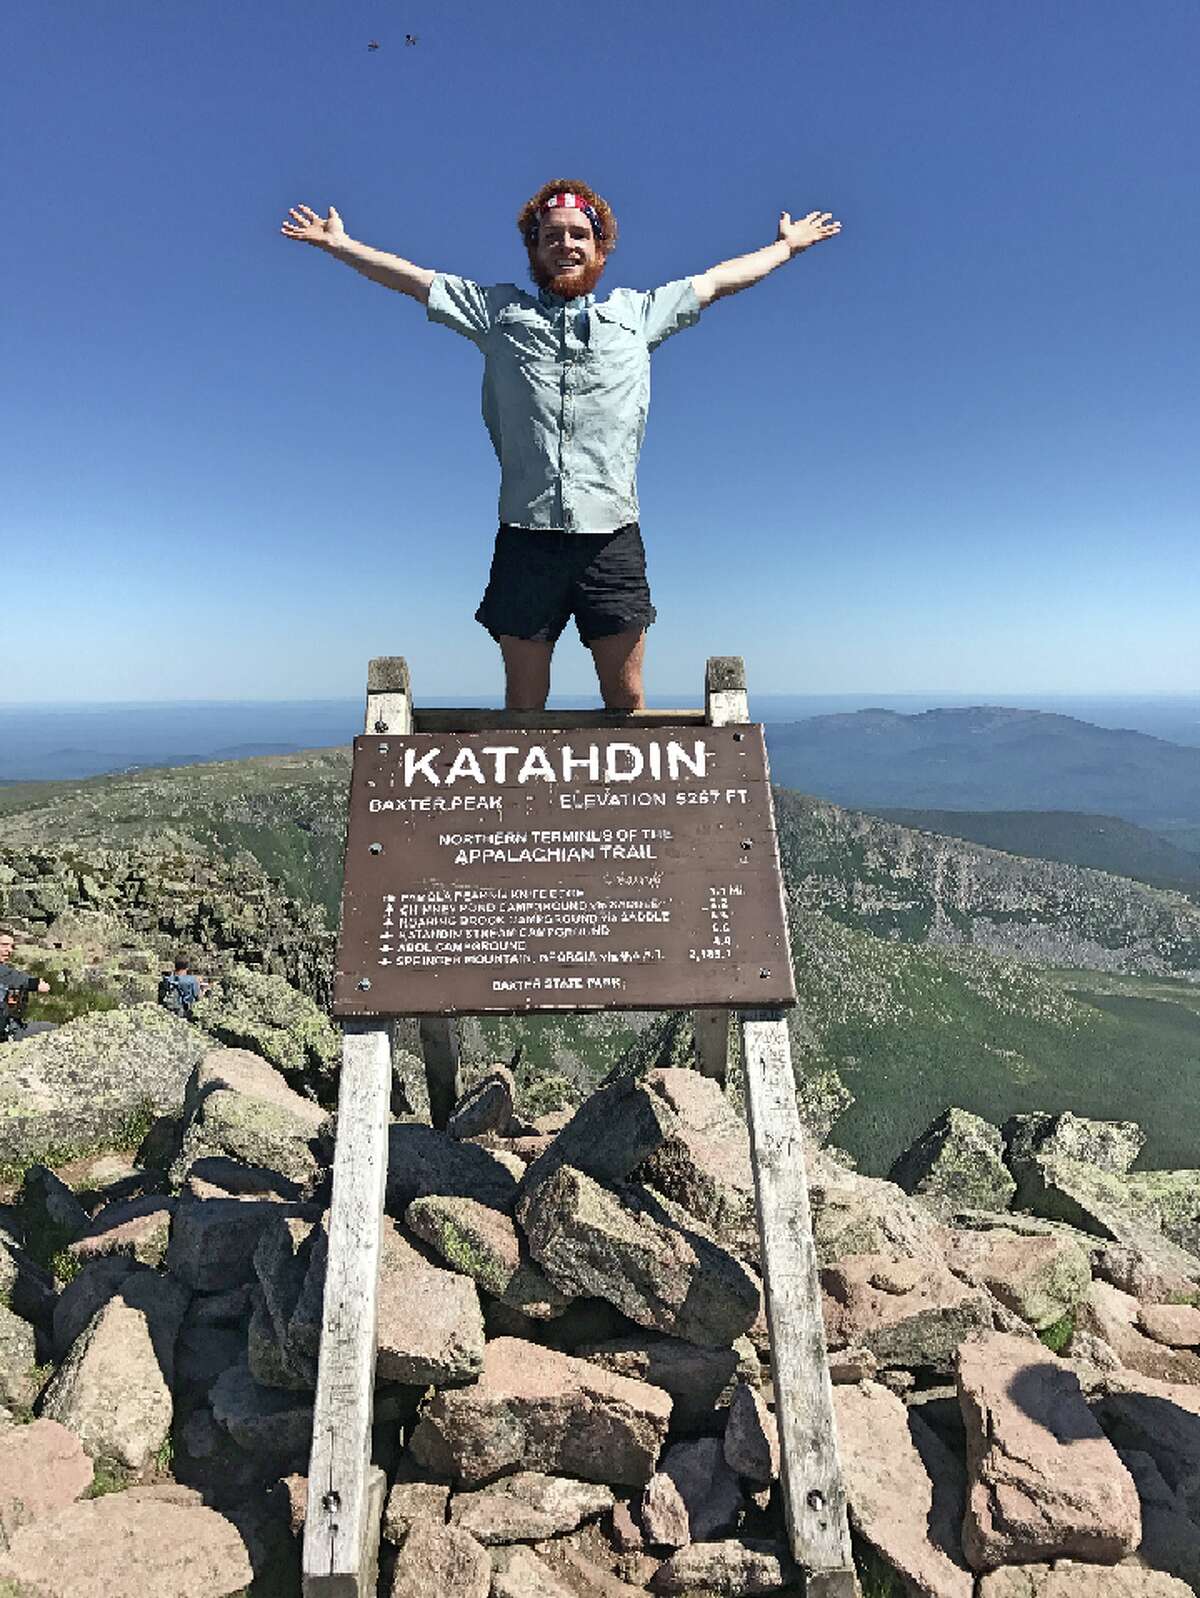 Billy McGovern stands atop Mount Katahdin after completing the Appalachian Trail, which runs from Georgia to Maine.